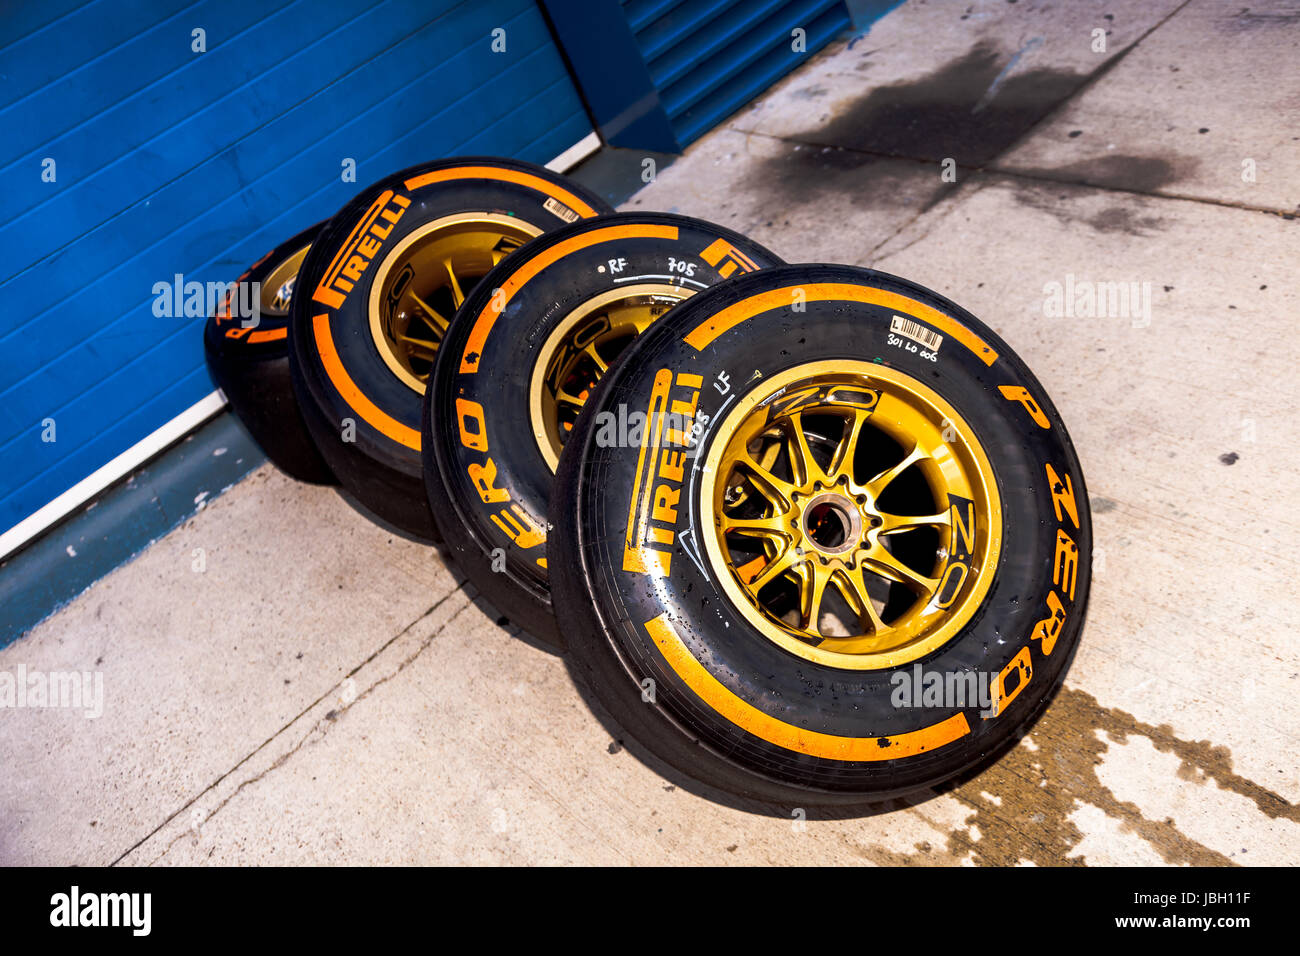 JEREZ DE LA FRONTERA, SPAIN - FEB 08: Exposition of the several pneumatic tires Pirelli after be used on a test session on February 08 , 2013, in Jerez de la Frontera , Spain Stock Photo